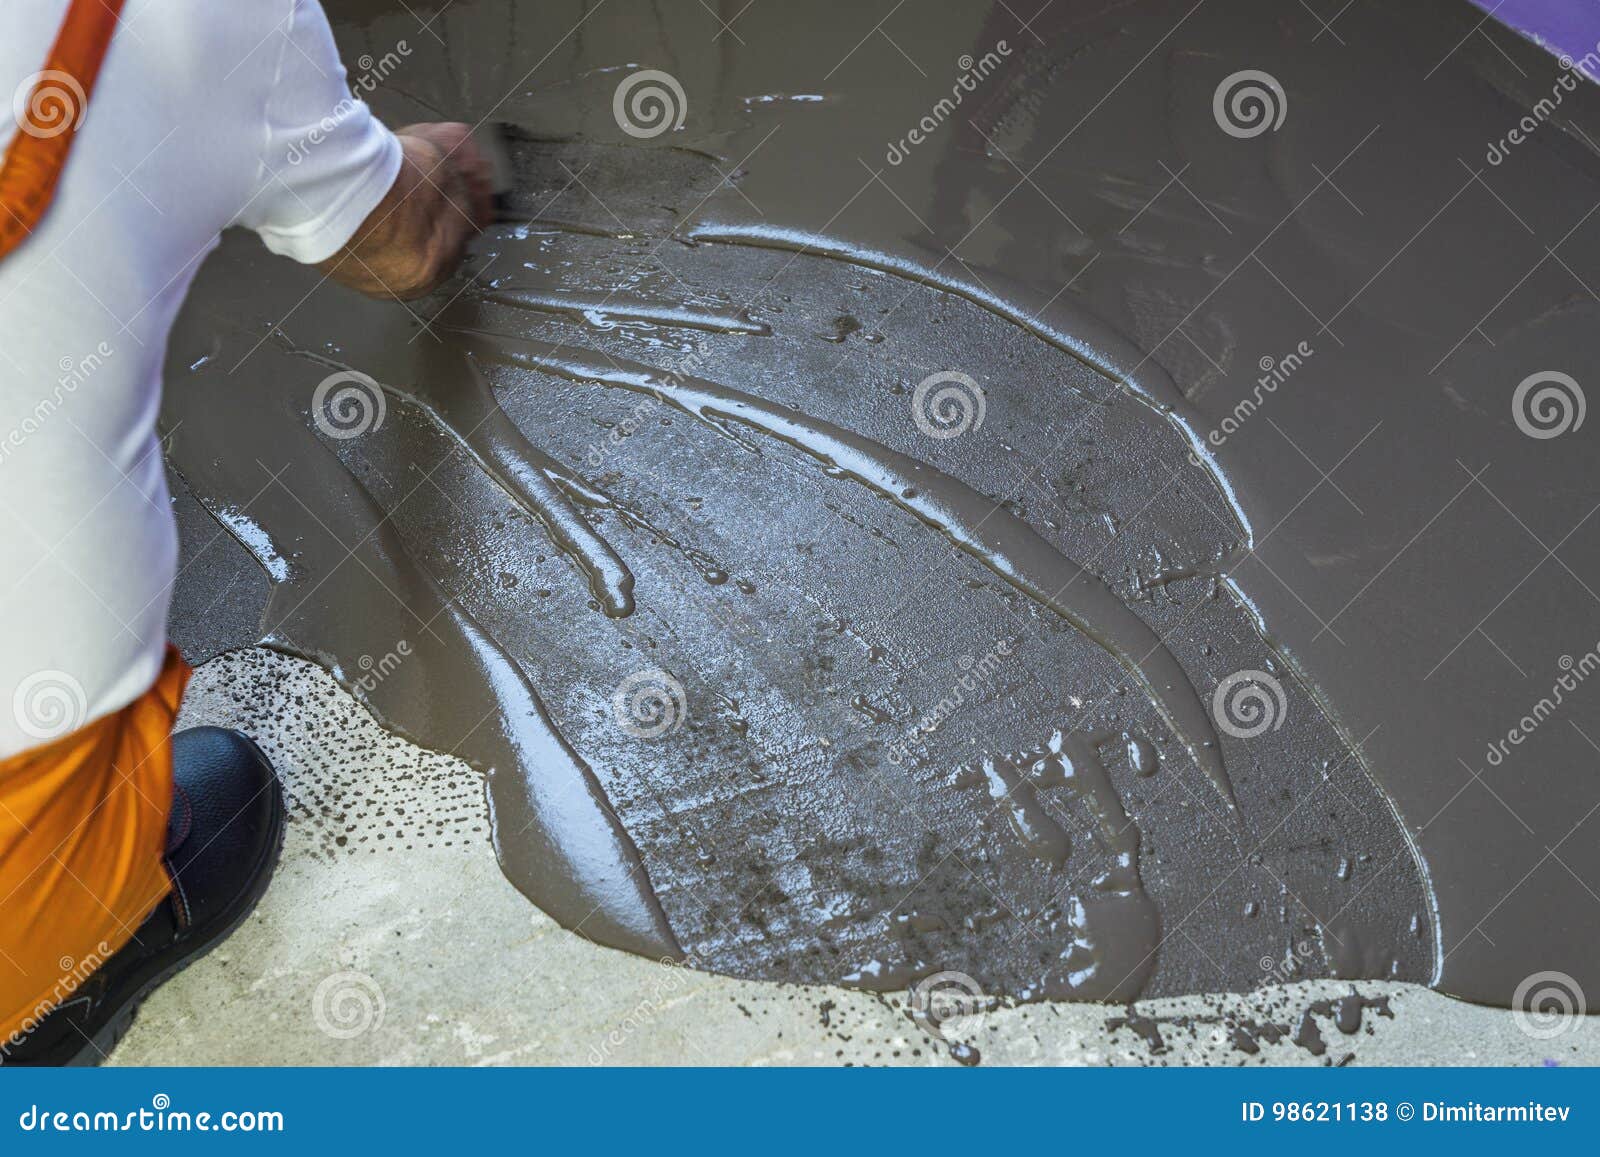 worker puts a self leveling screed